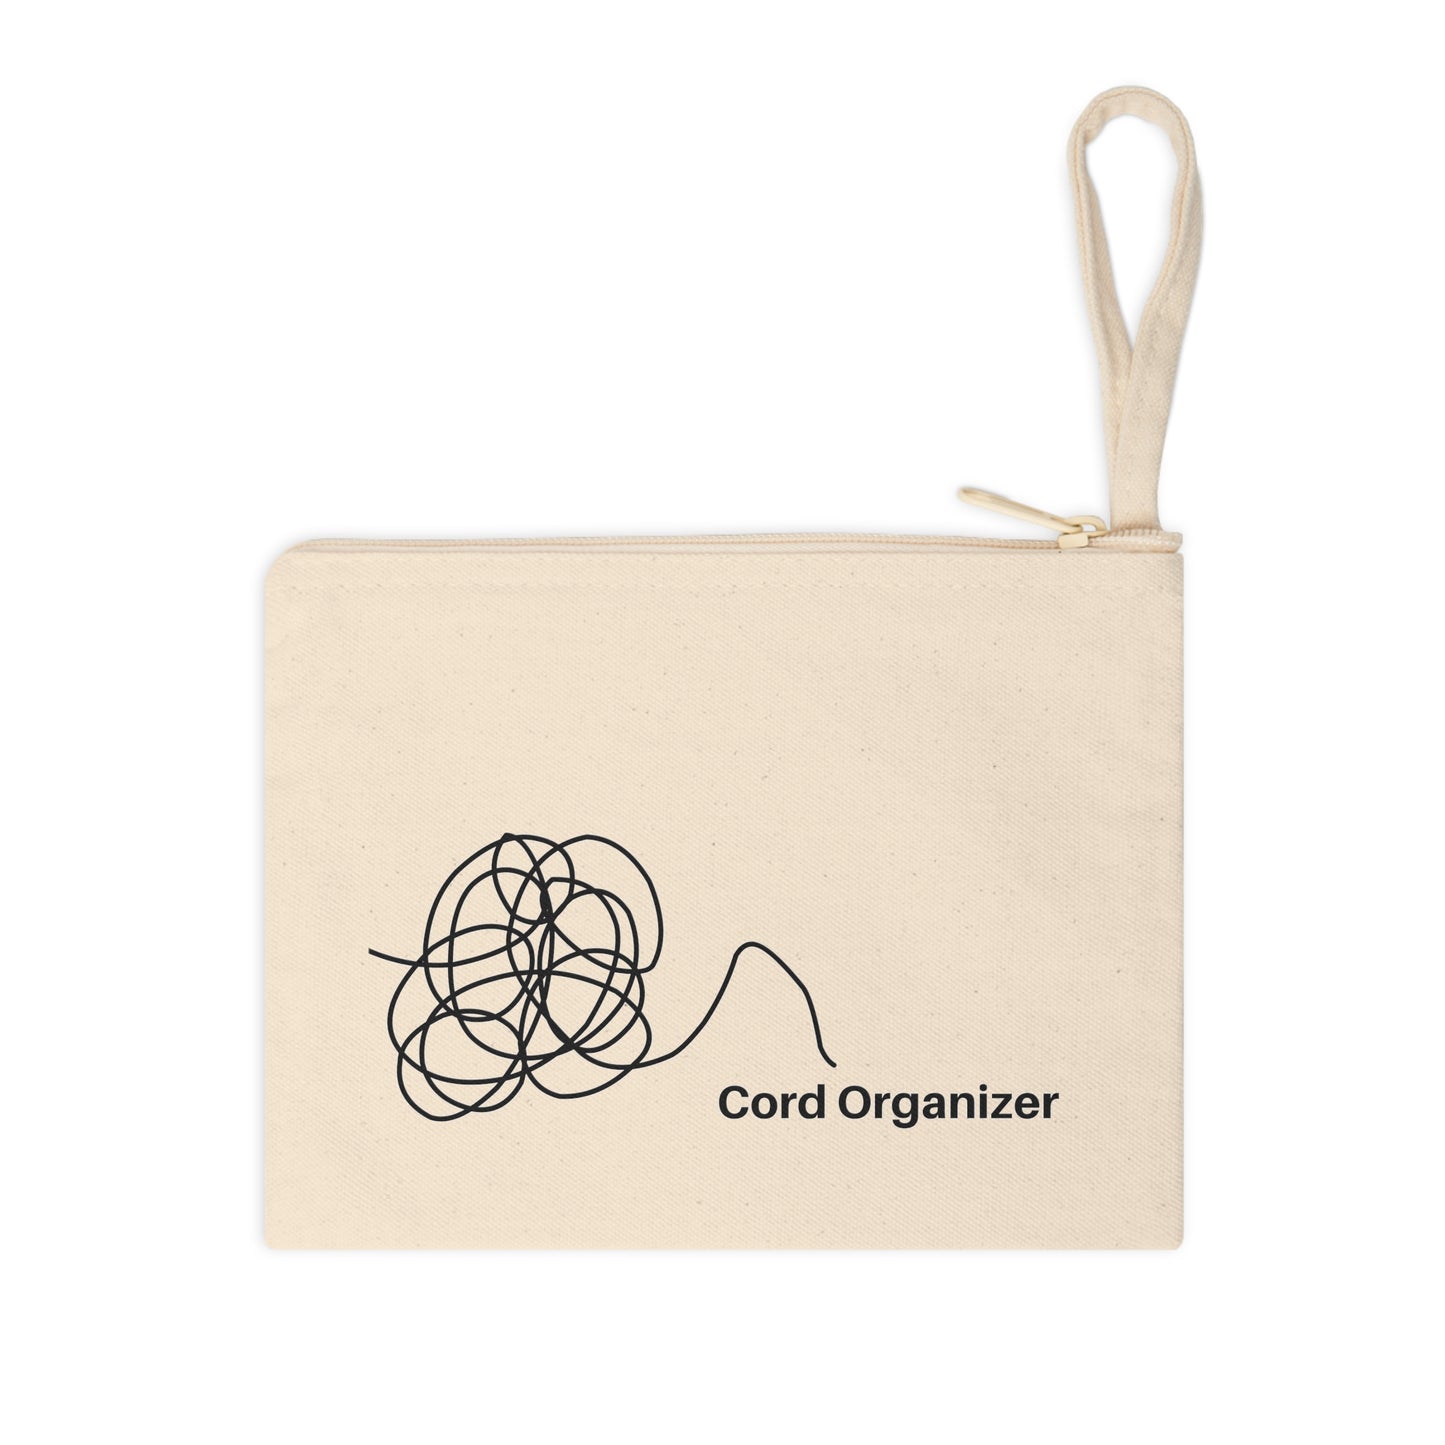 Cord Organizer Travel Packing Bag and Toiletry Pouch